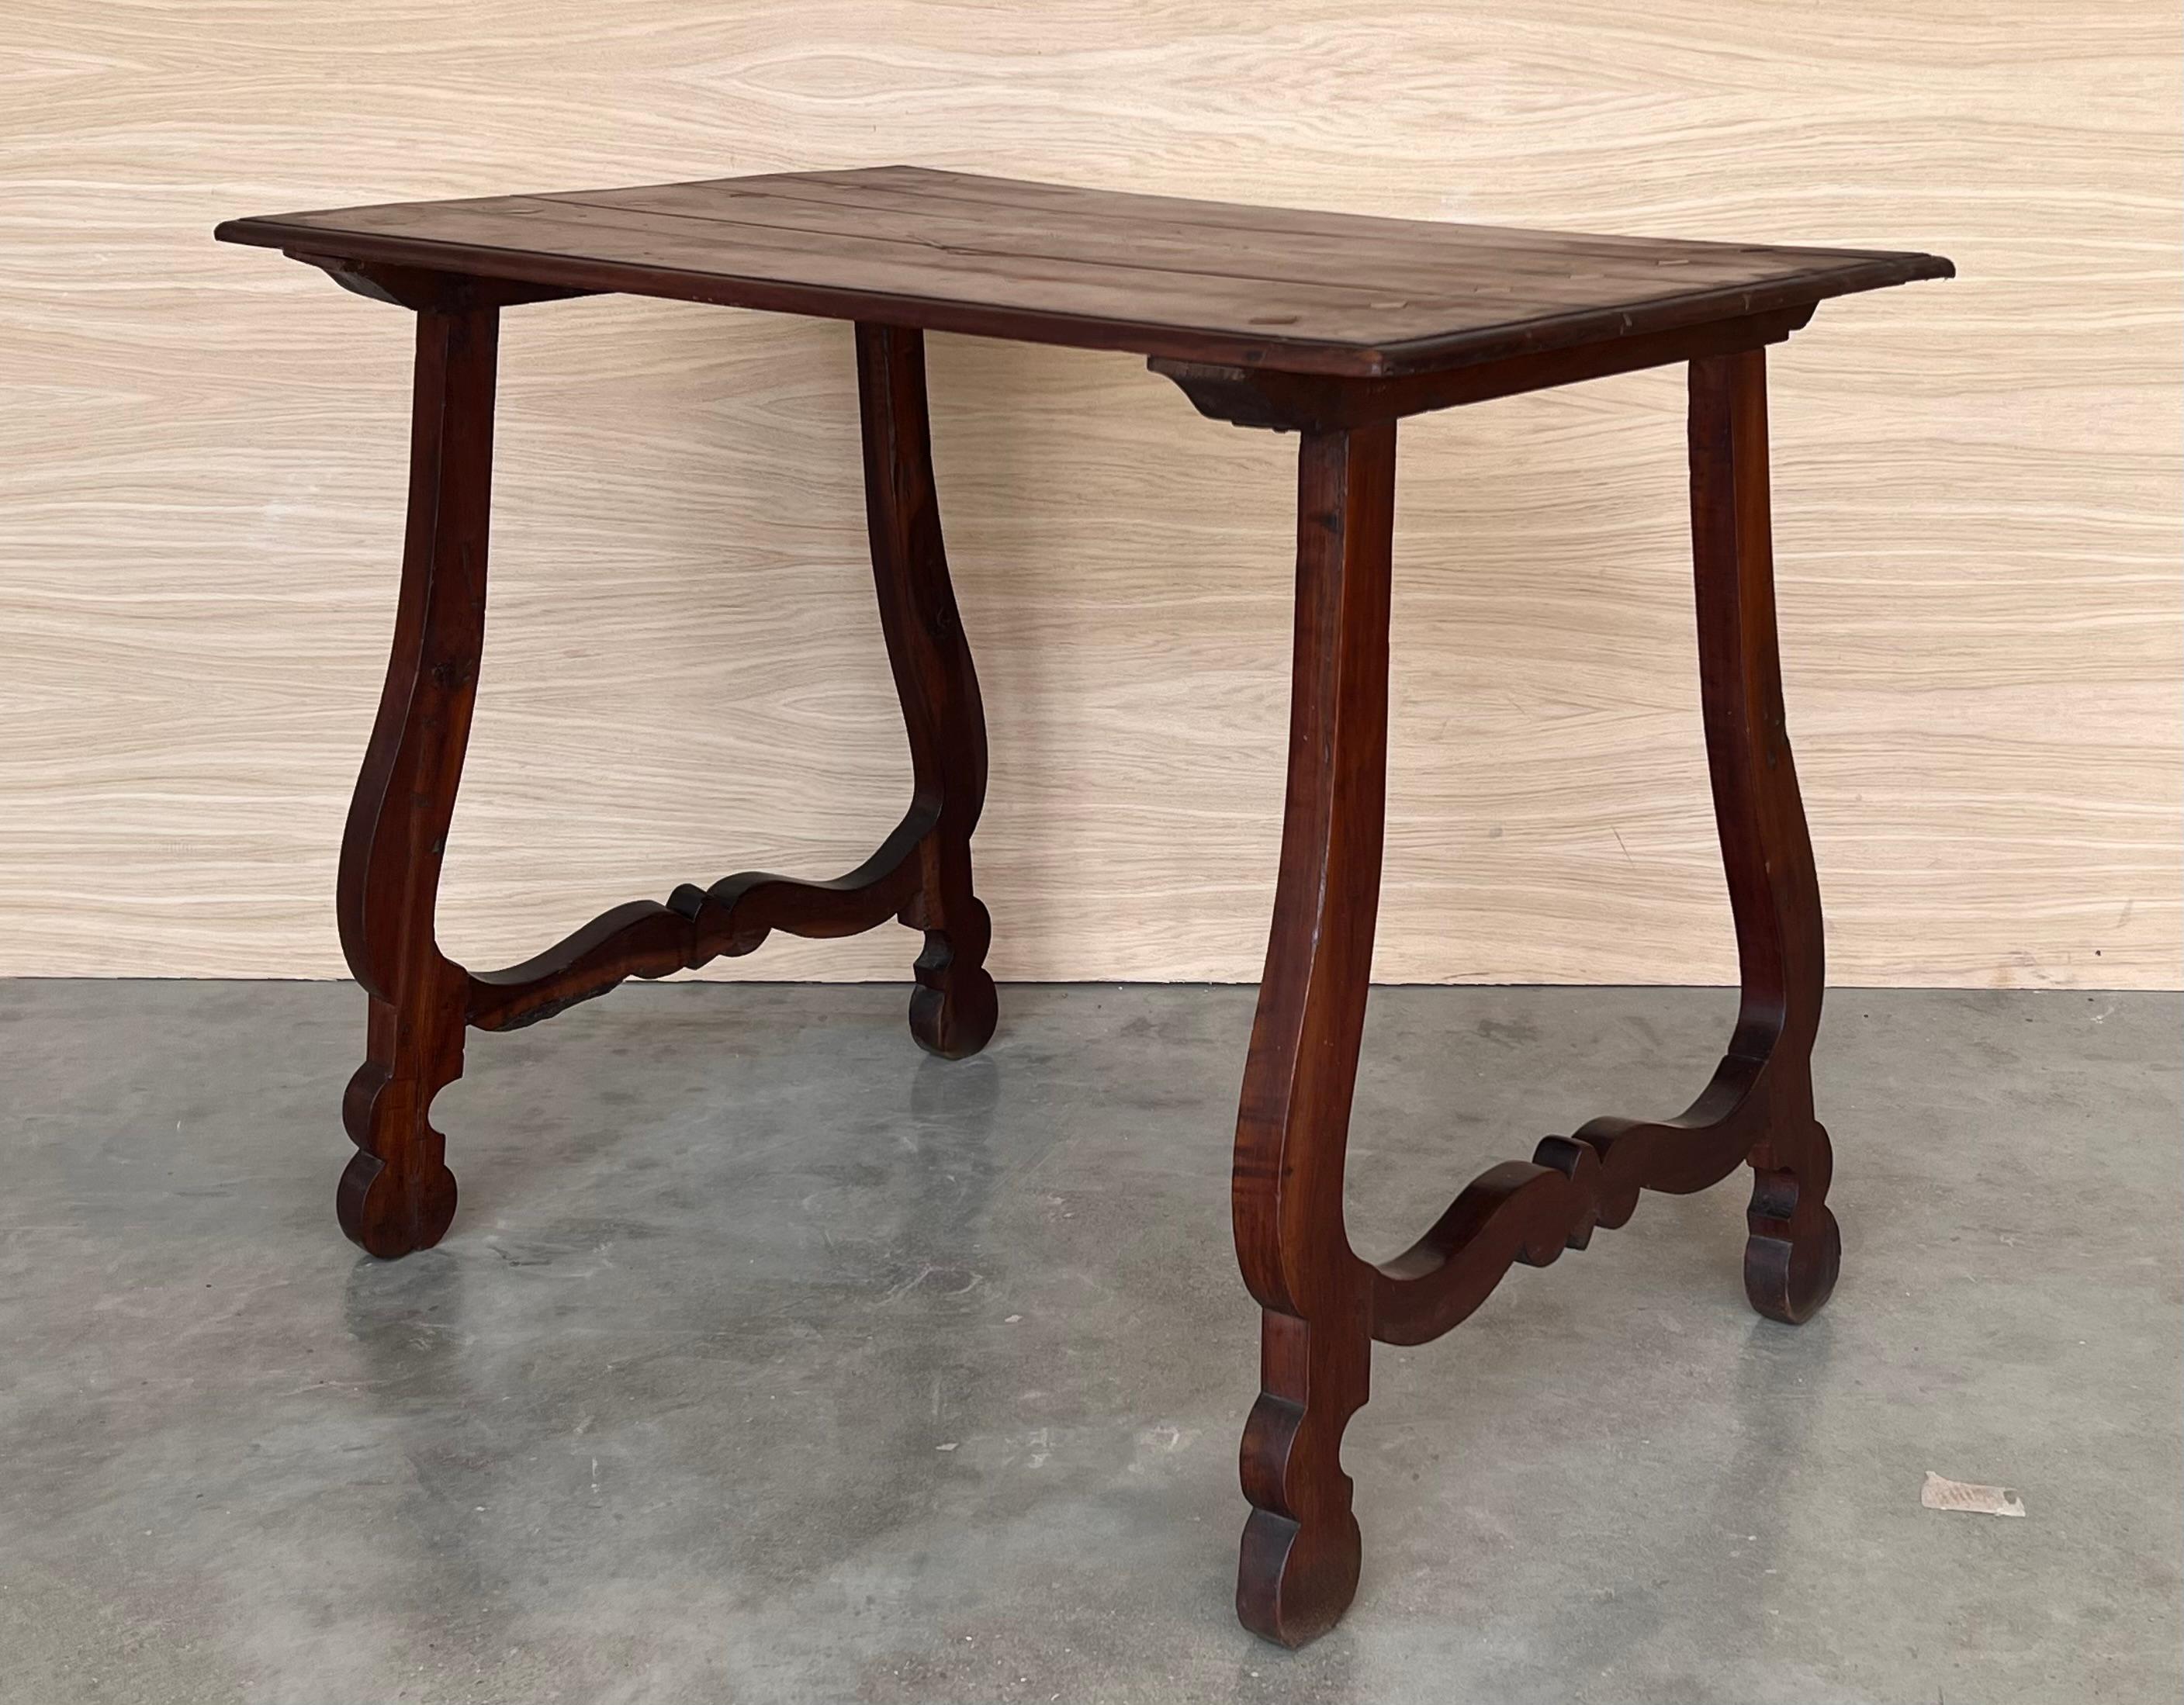 Side Table of Walnut with Carved Lyre Legs and Top, Spanish, 19th Century For Sale 2